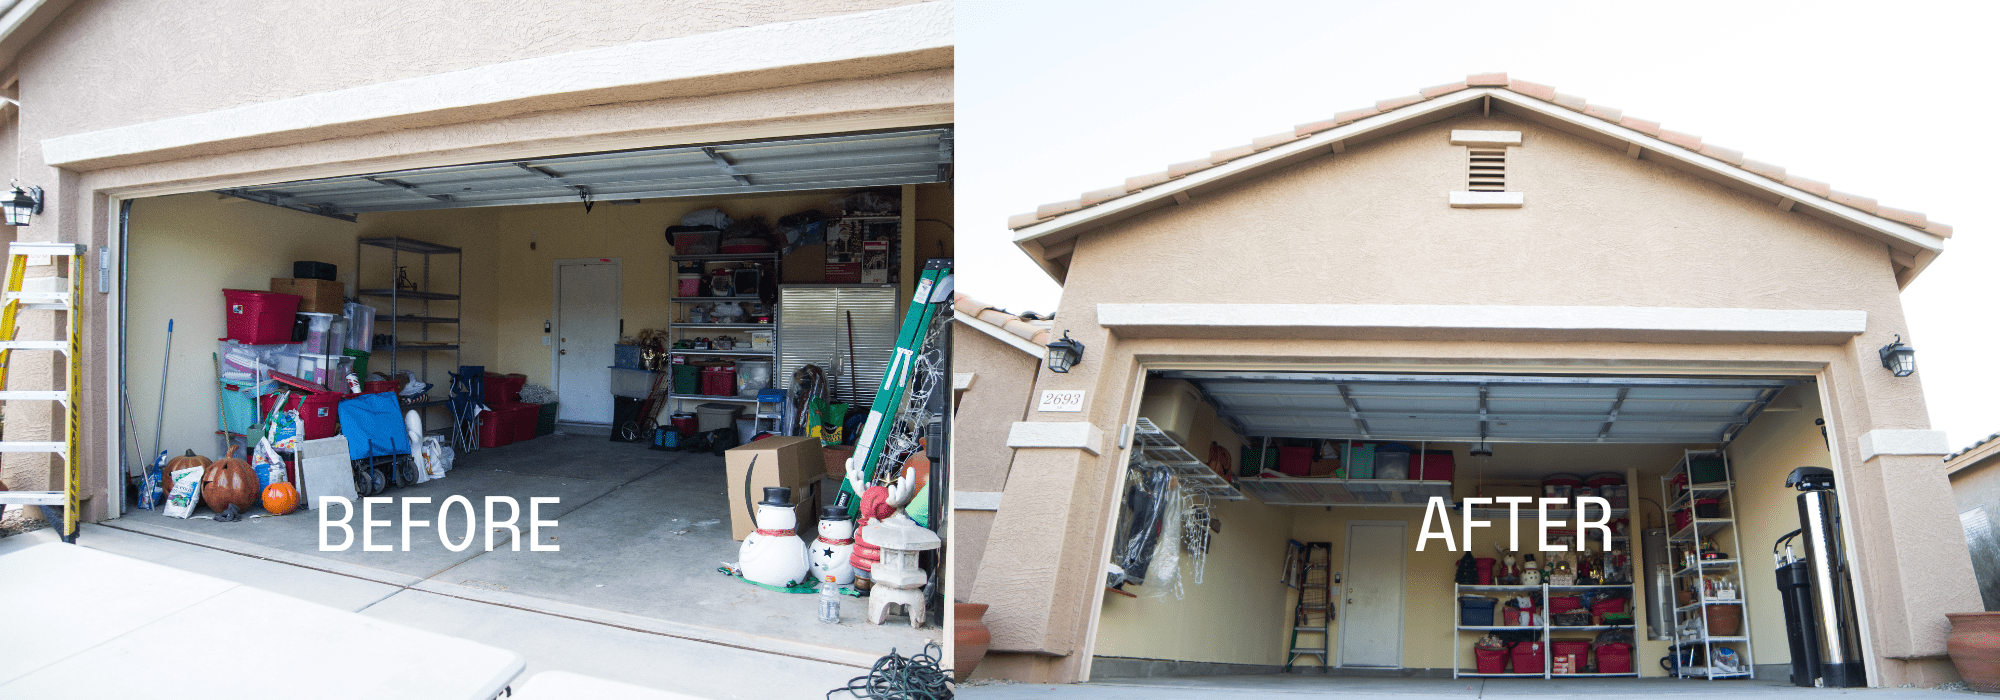 Garage Storage Solutions Before and After